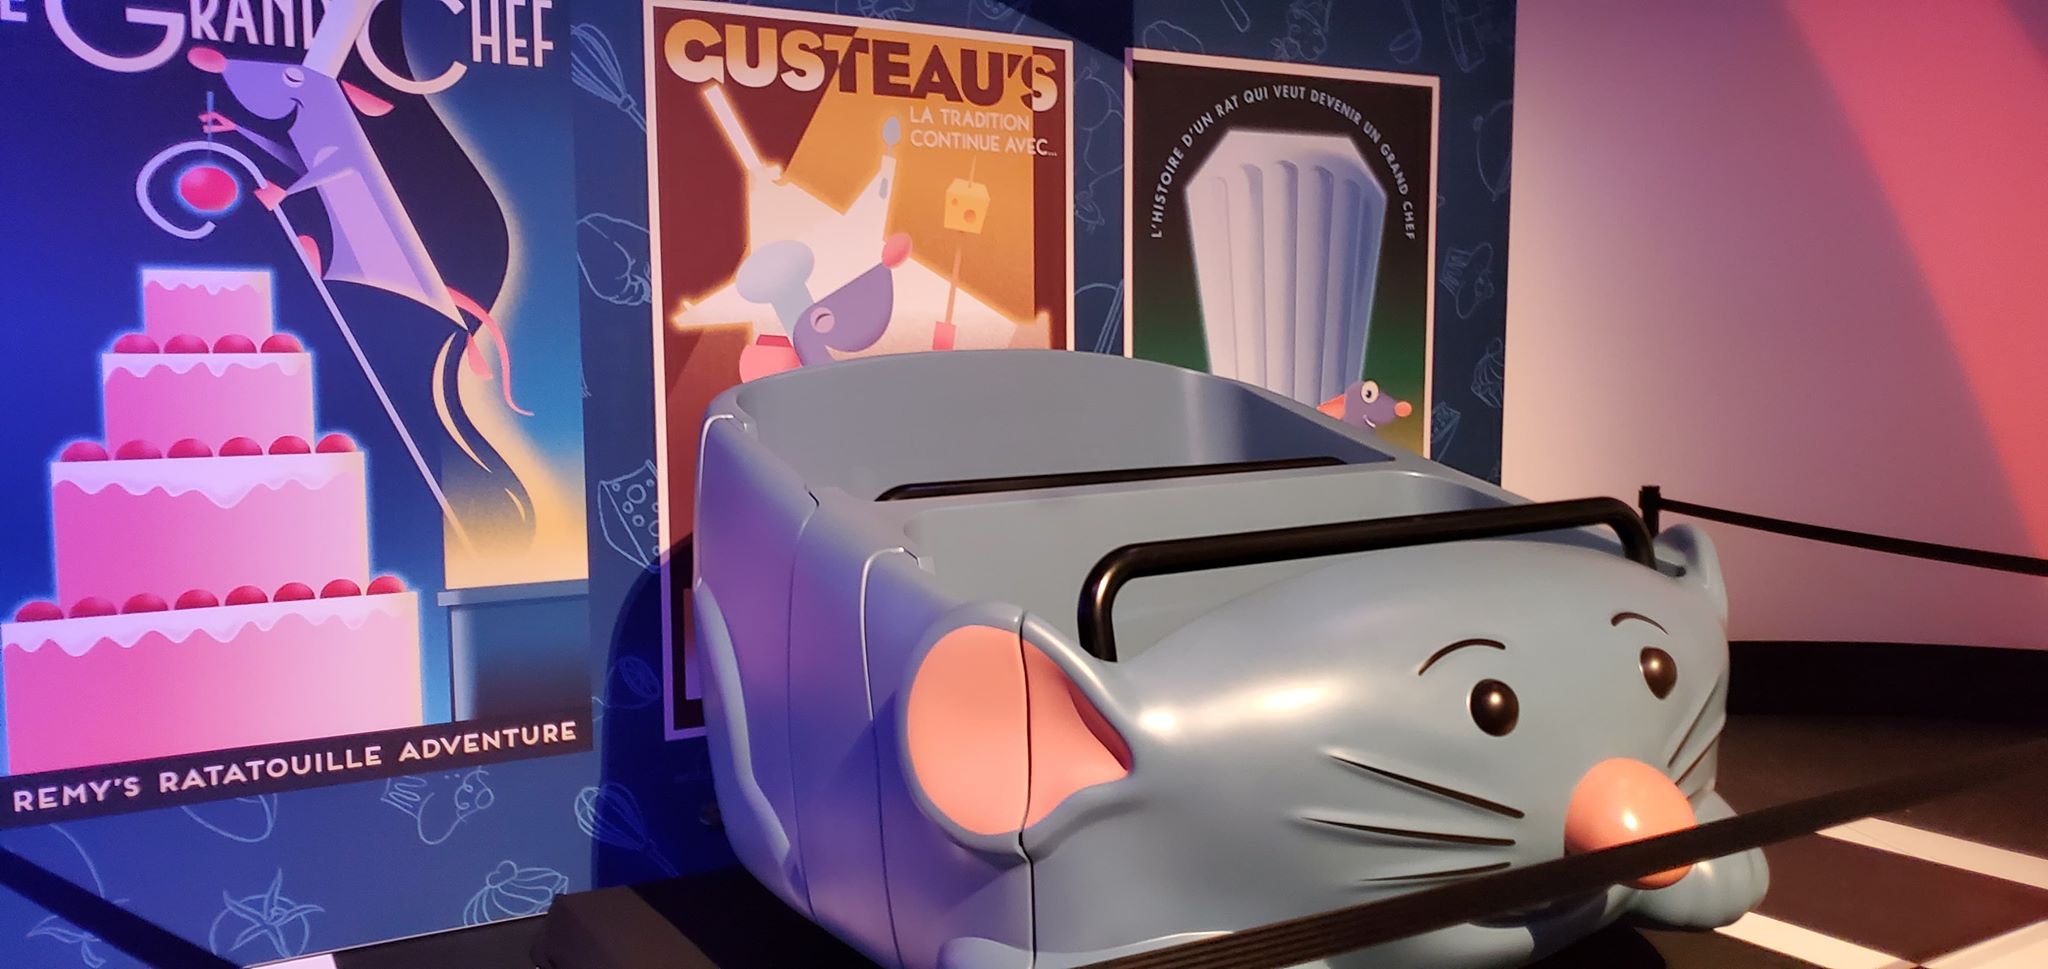 Fastpass and single rider will be coming to Remy’s Ratatouille Adventure